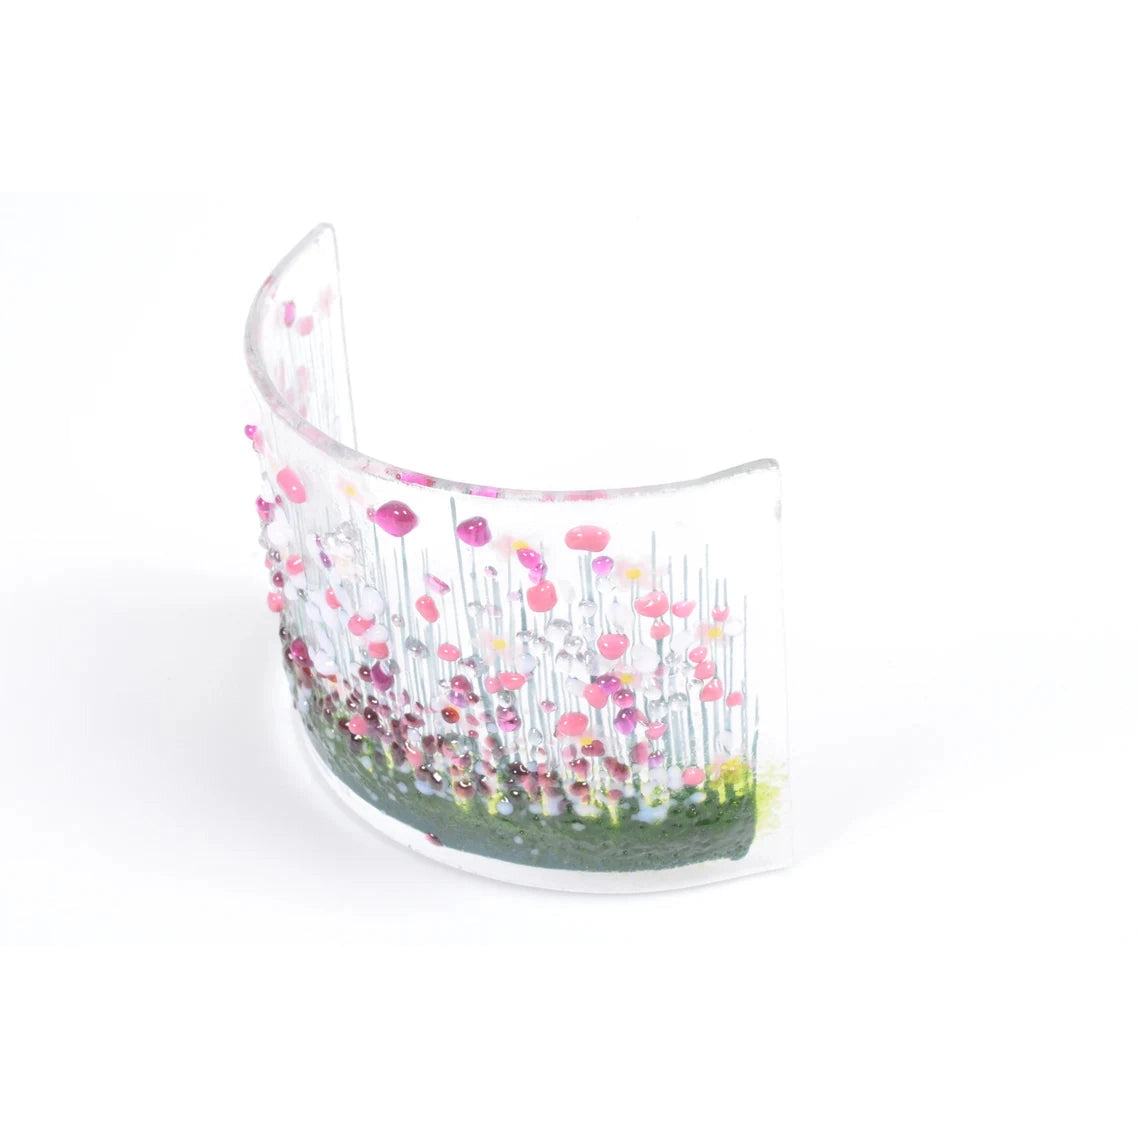 Handmade Fused Glass - Blooming Curve by Pam Peters Designs